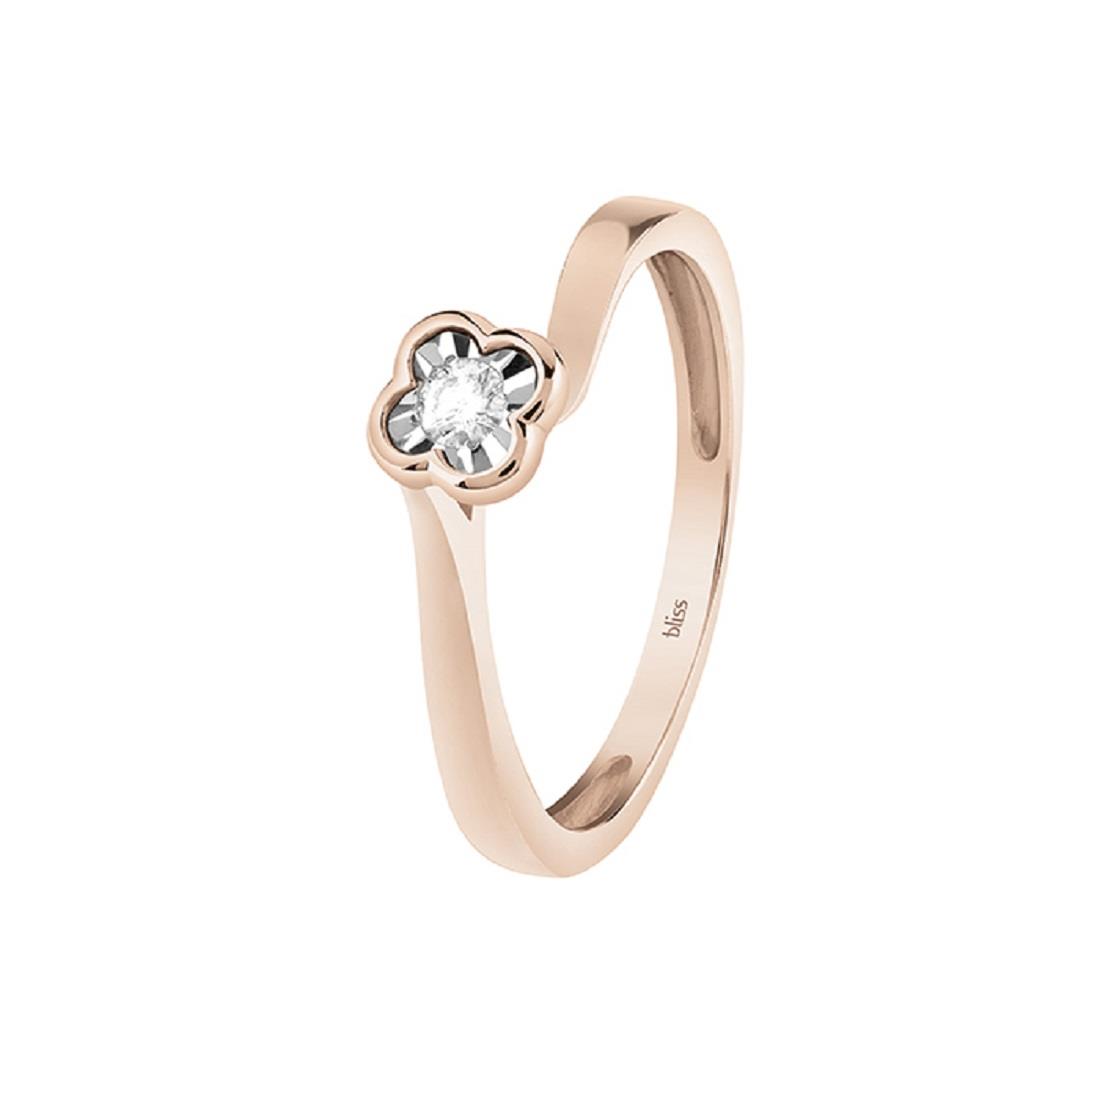 Rose gold ring with diamond ct. 0.09 - BLISS